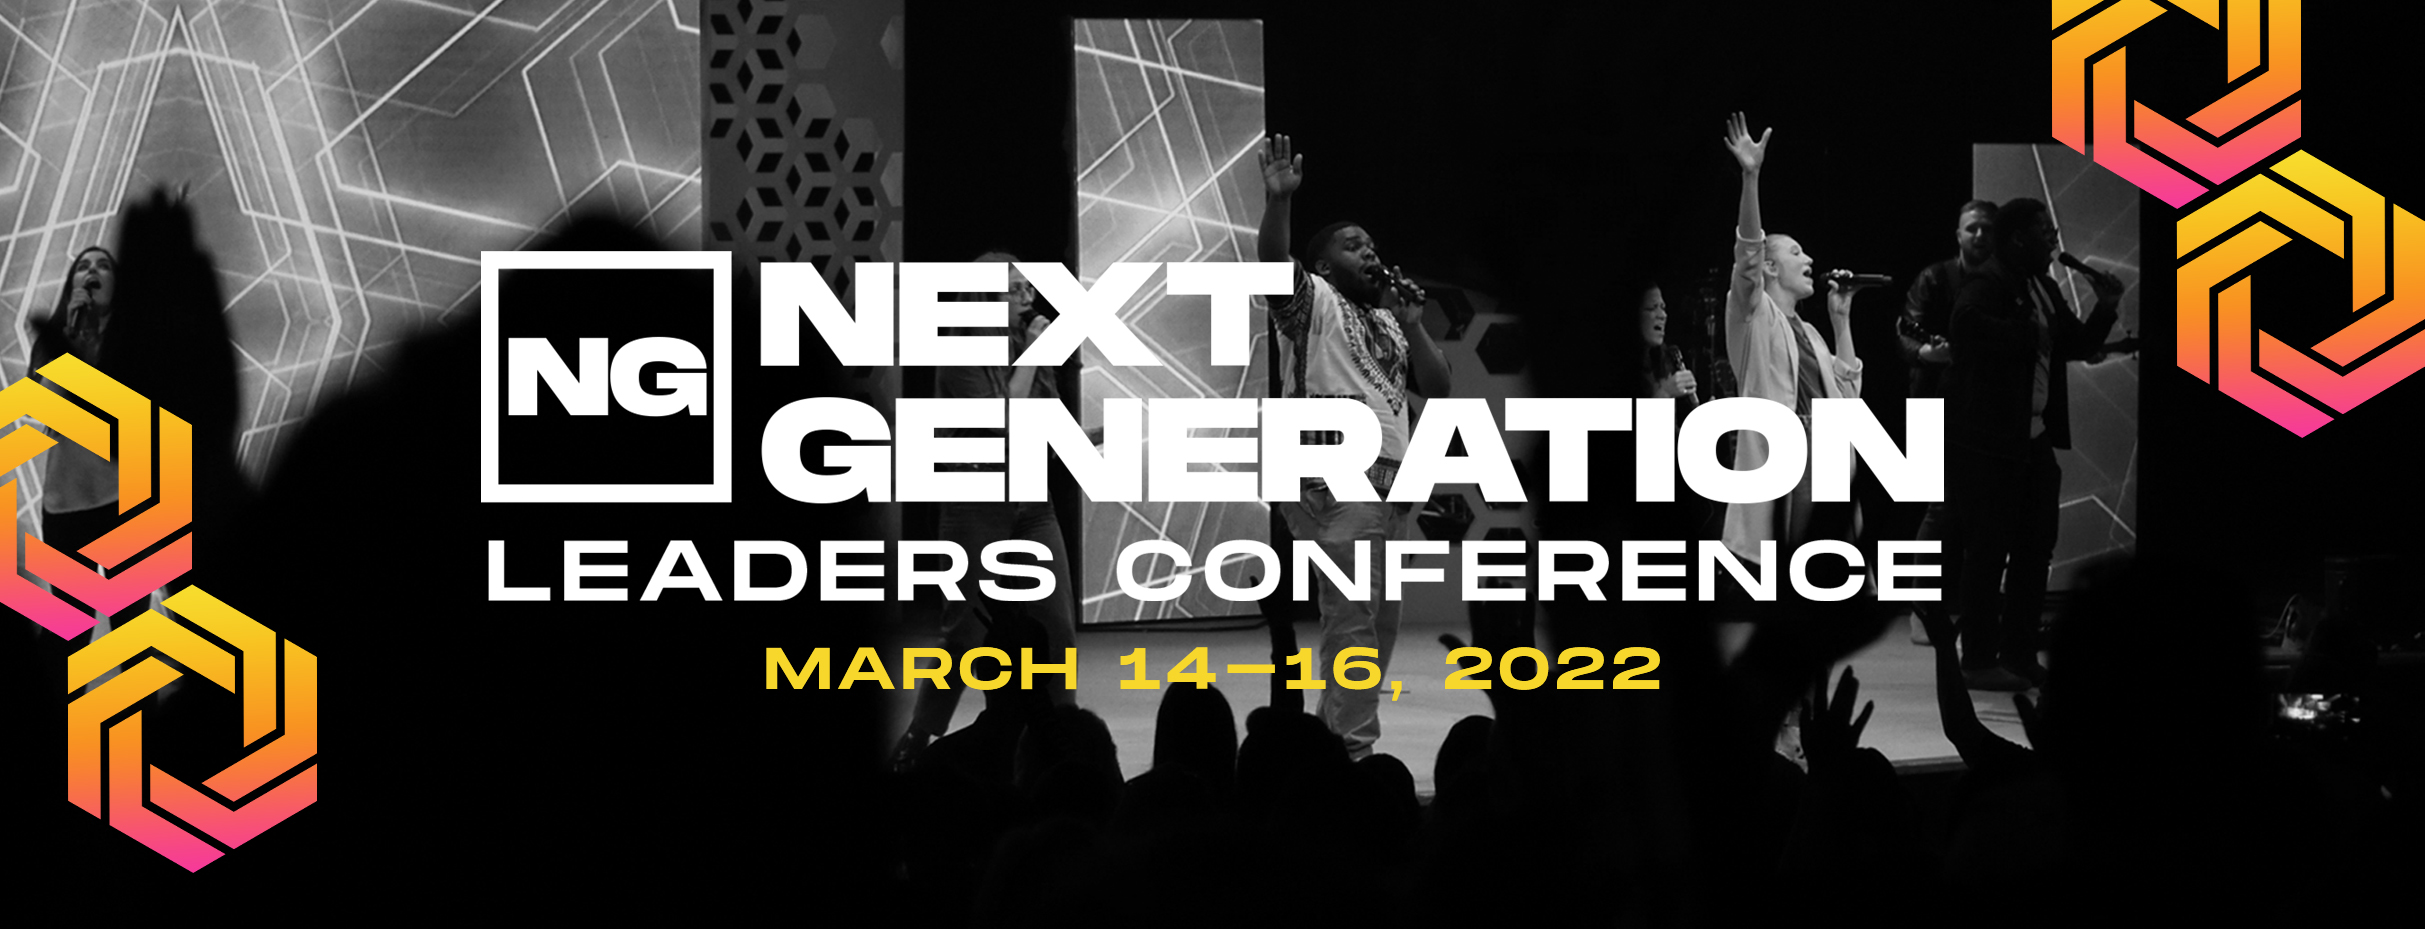 next-generation-conference-2022